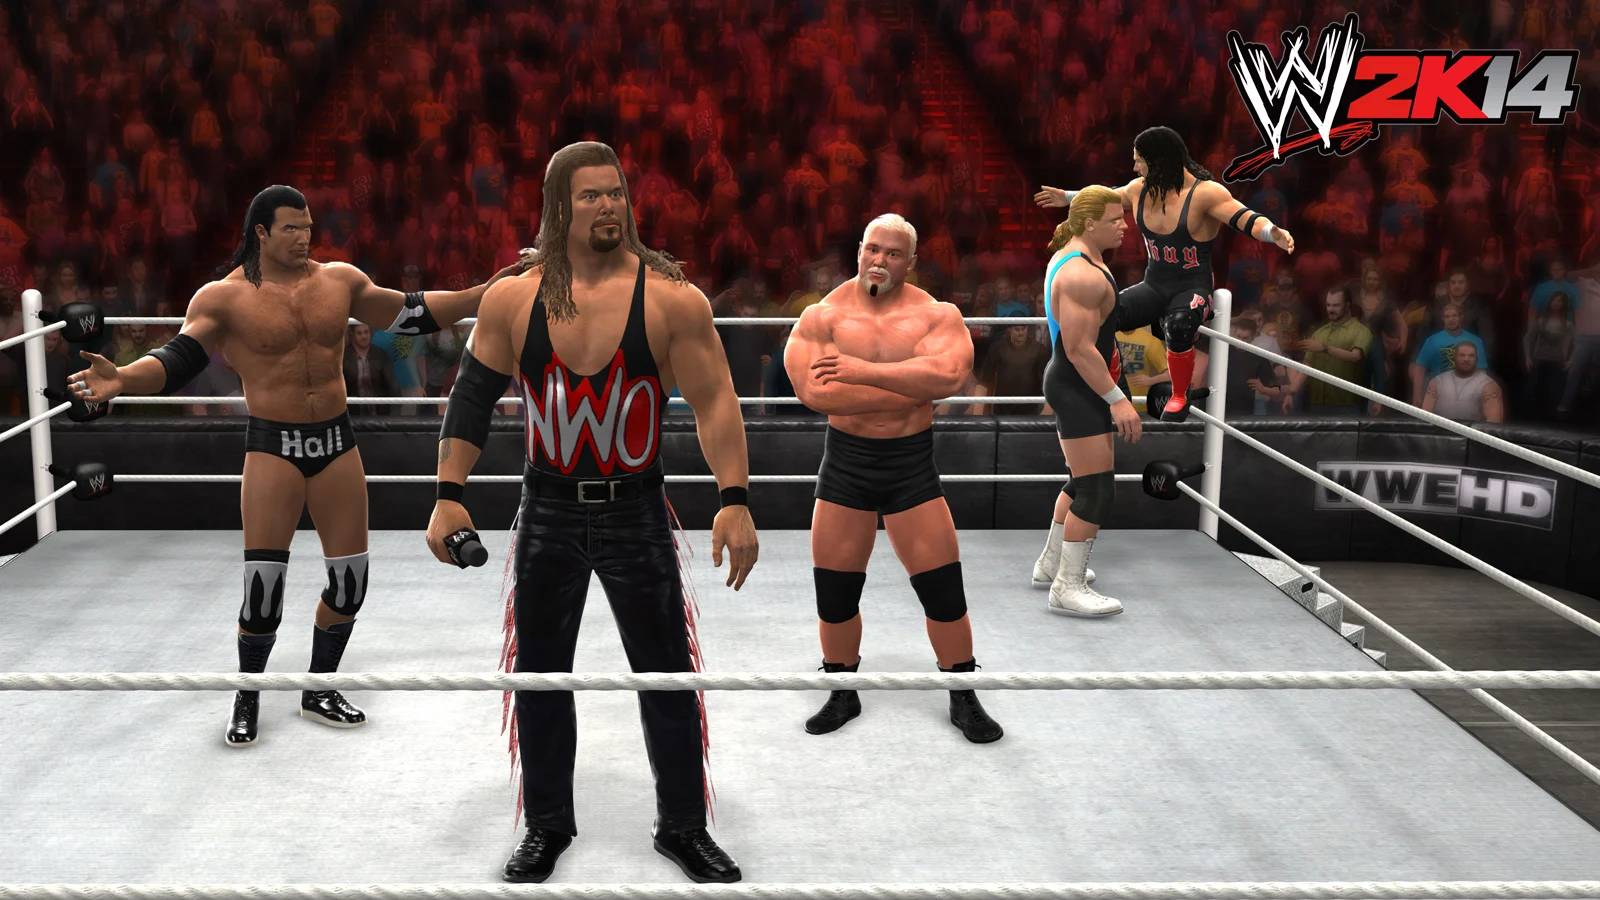 WWE 2k14 Game Free Download Highly Compressed